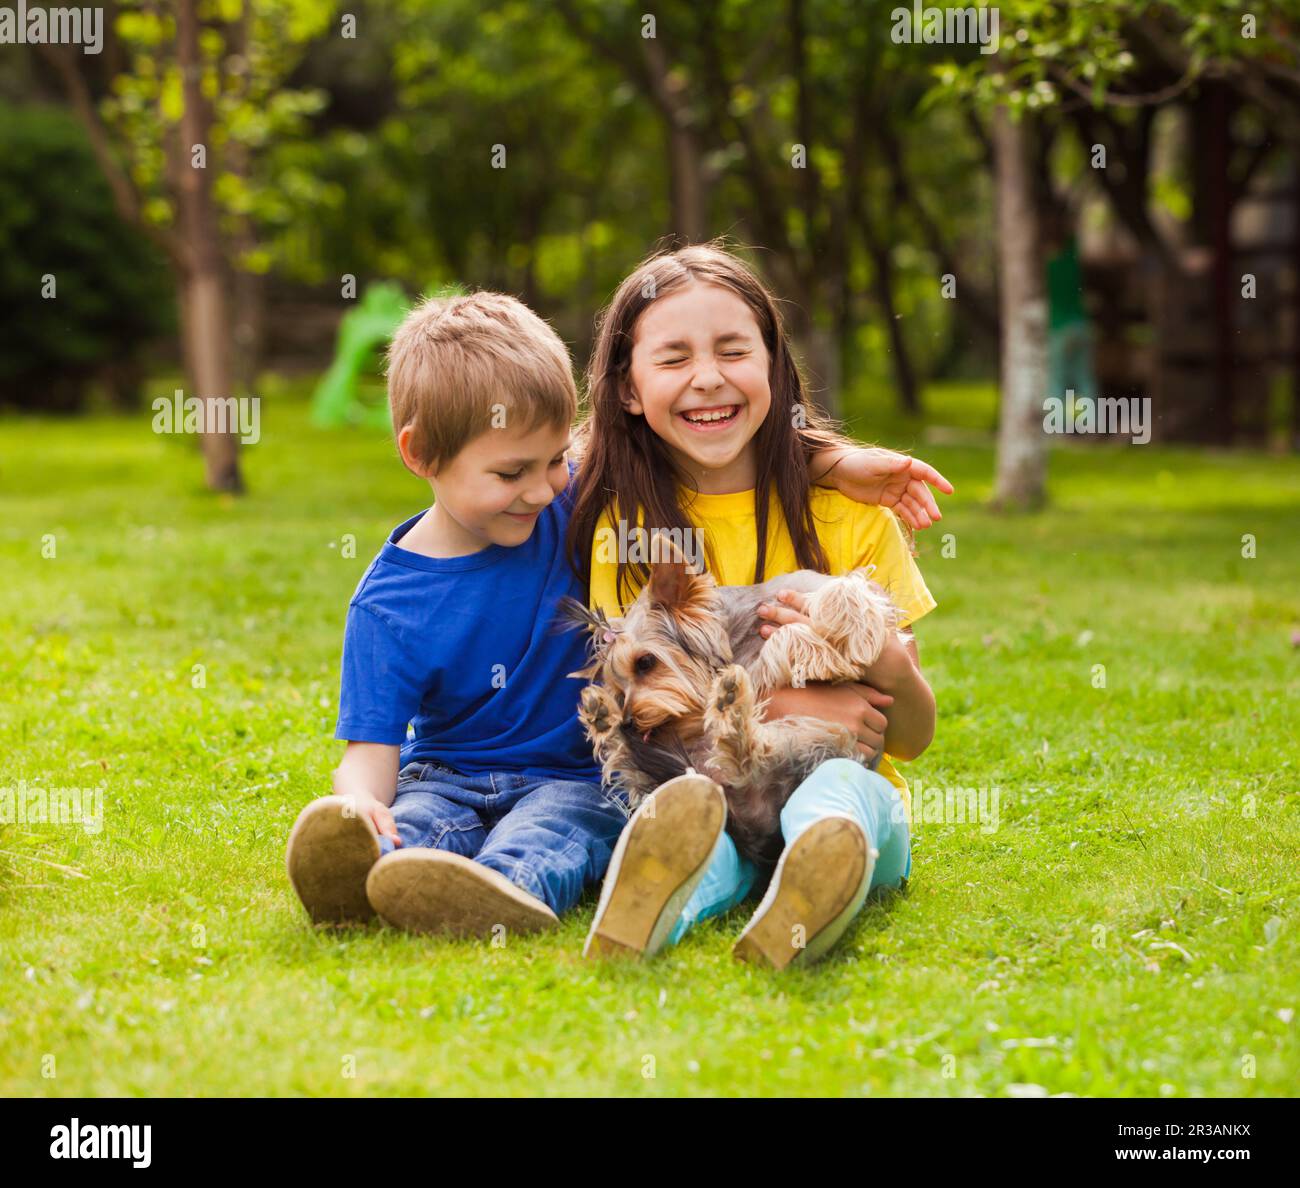 Children play with a little dog in the backyard Stock Photo